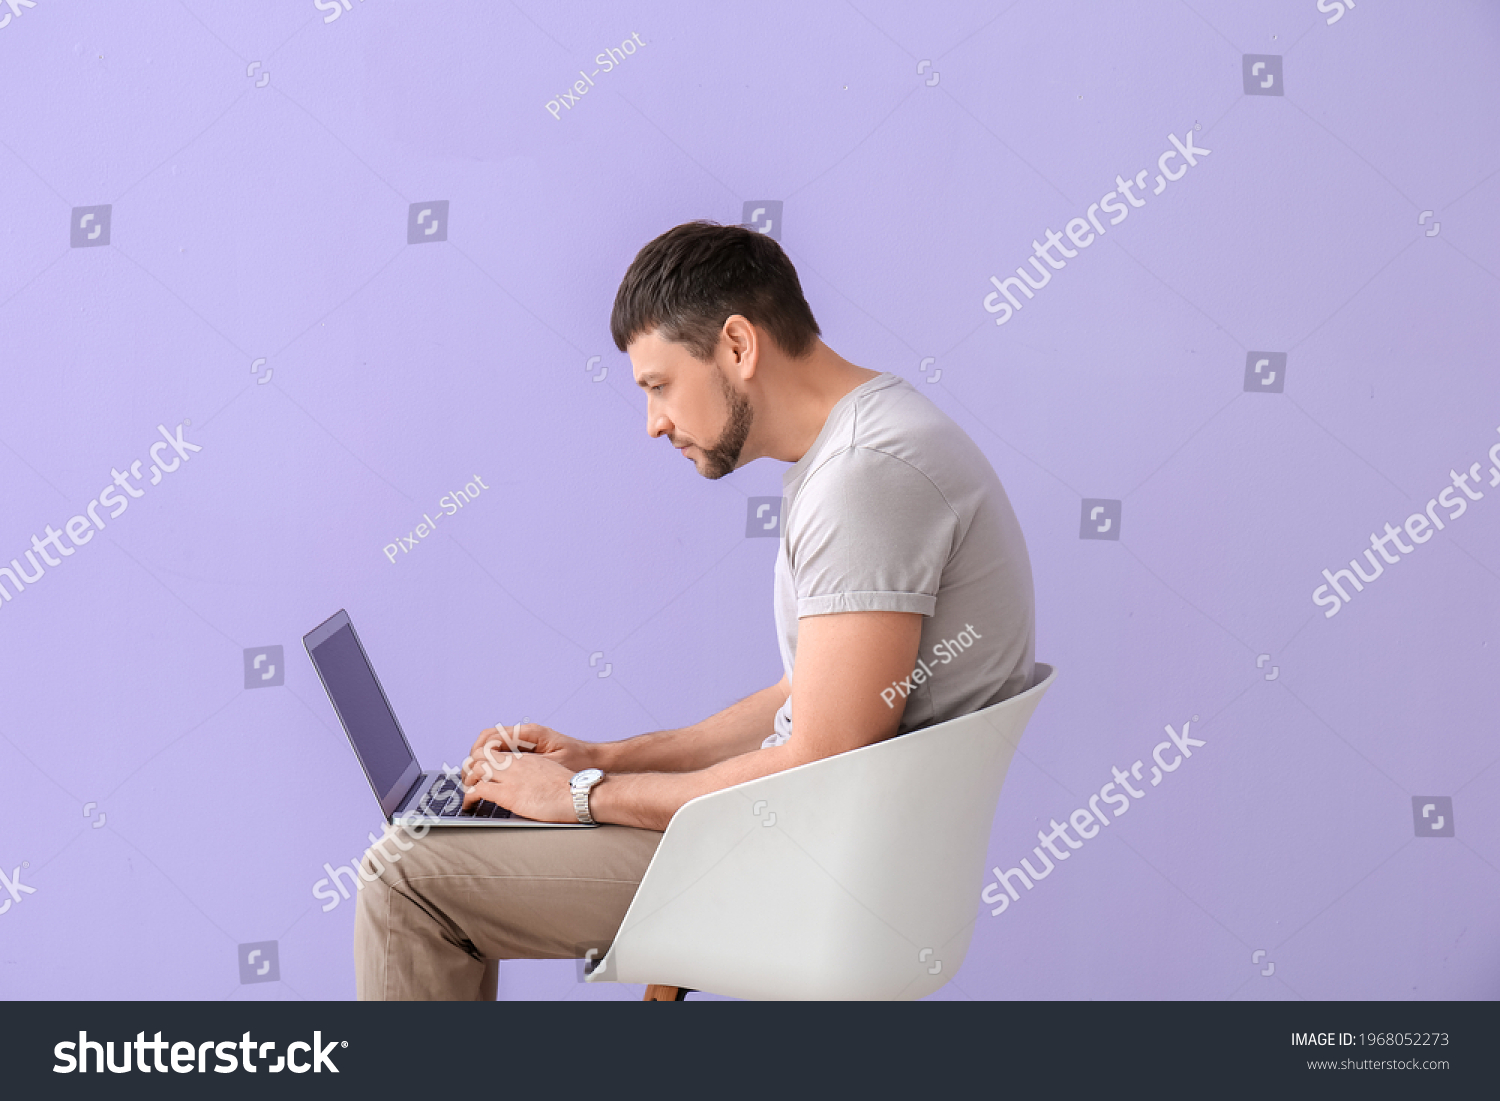 Man with bad posture using laptop while sitting on chair against color background #1968052273